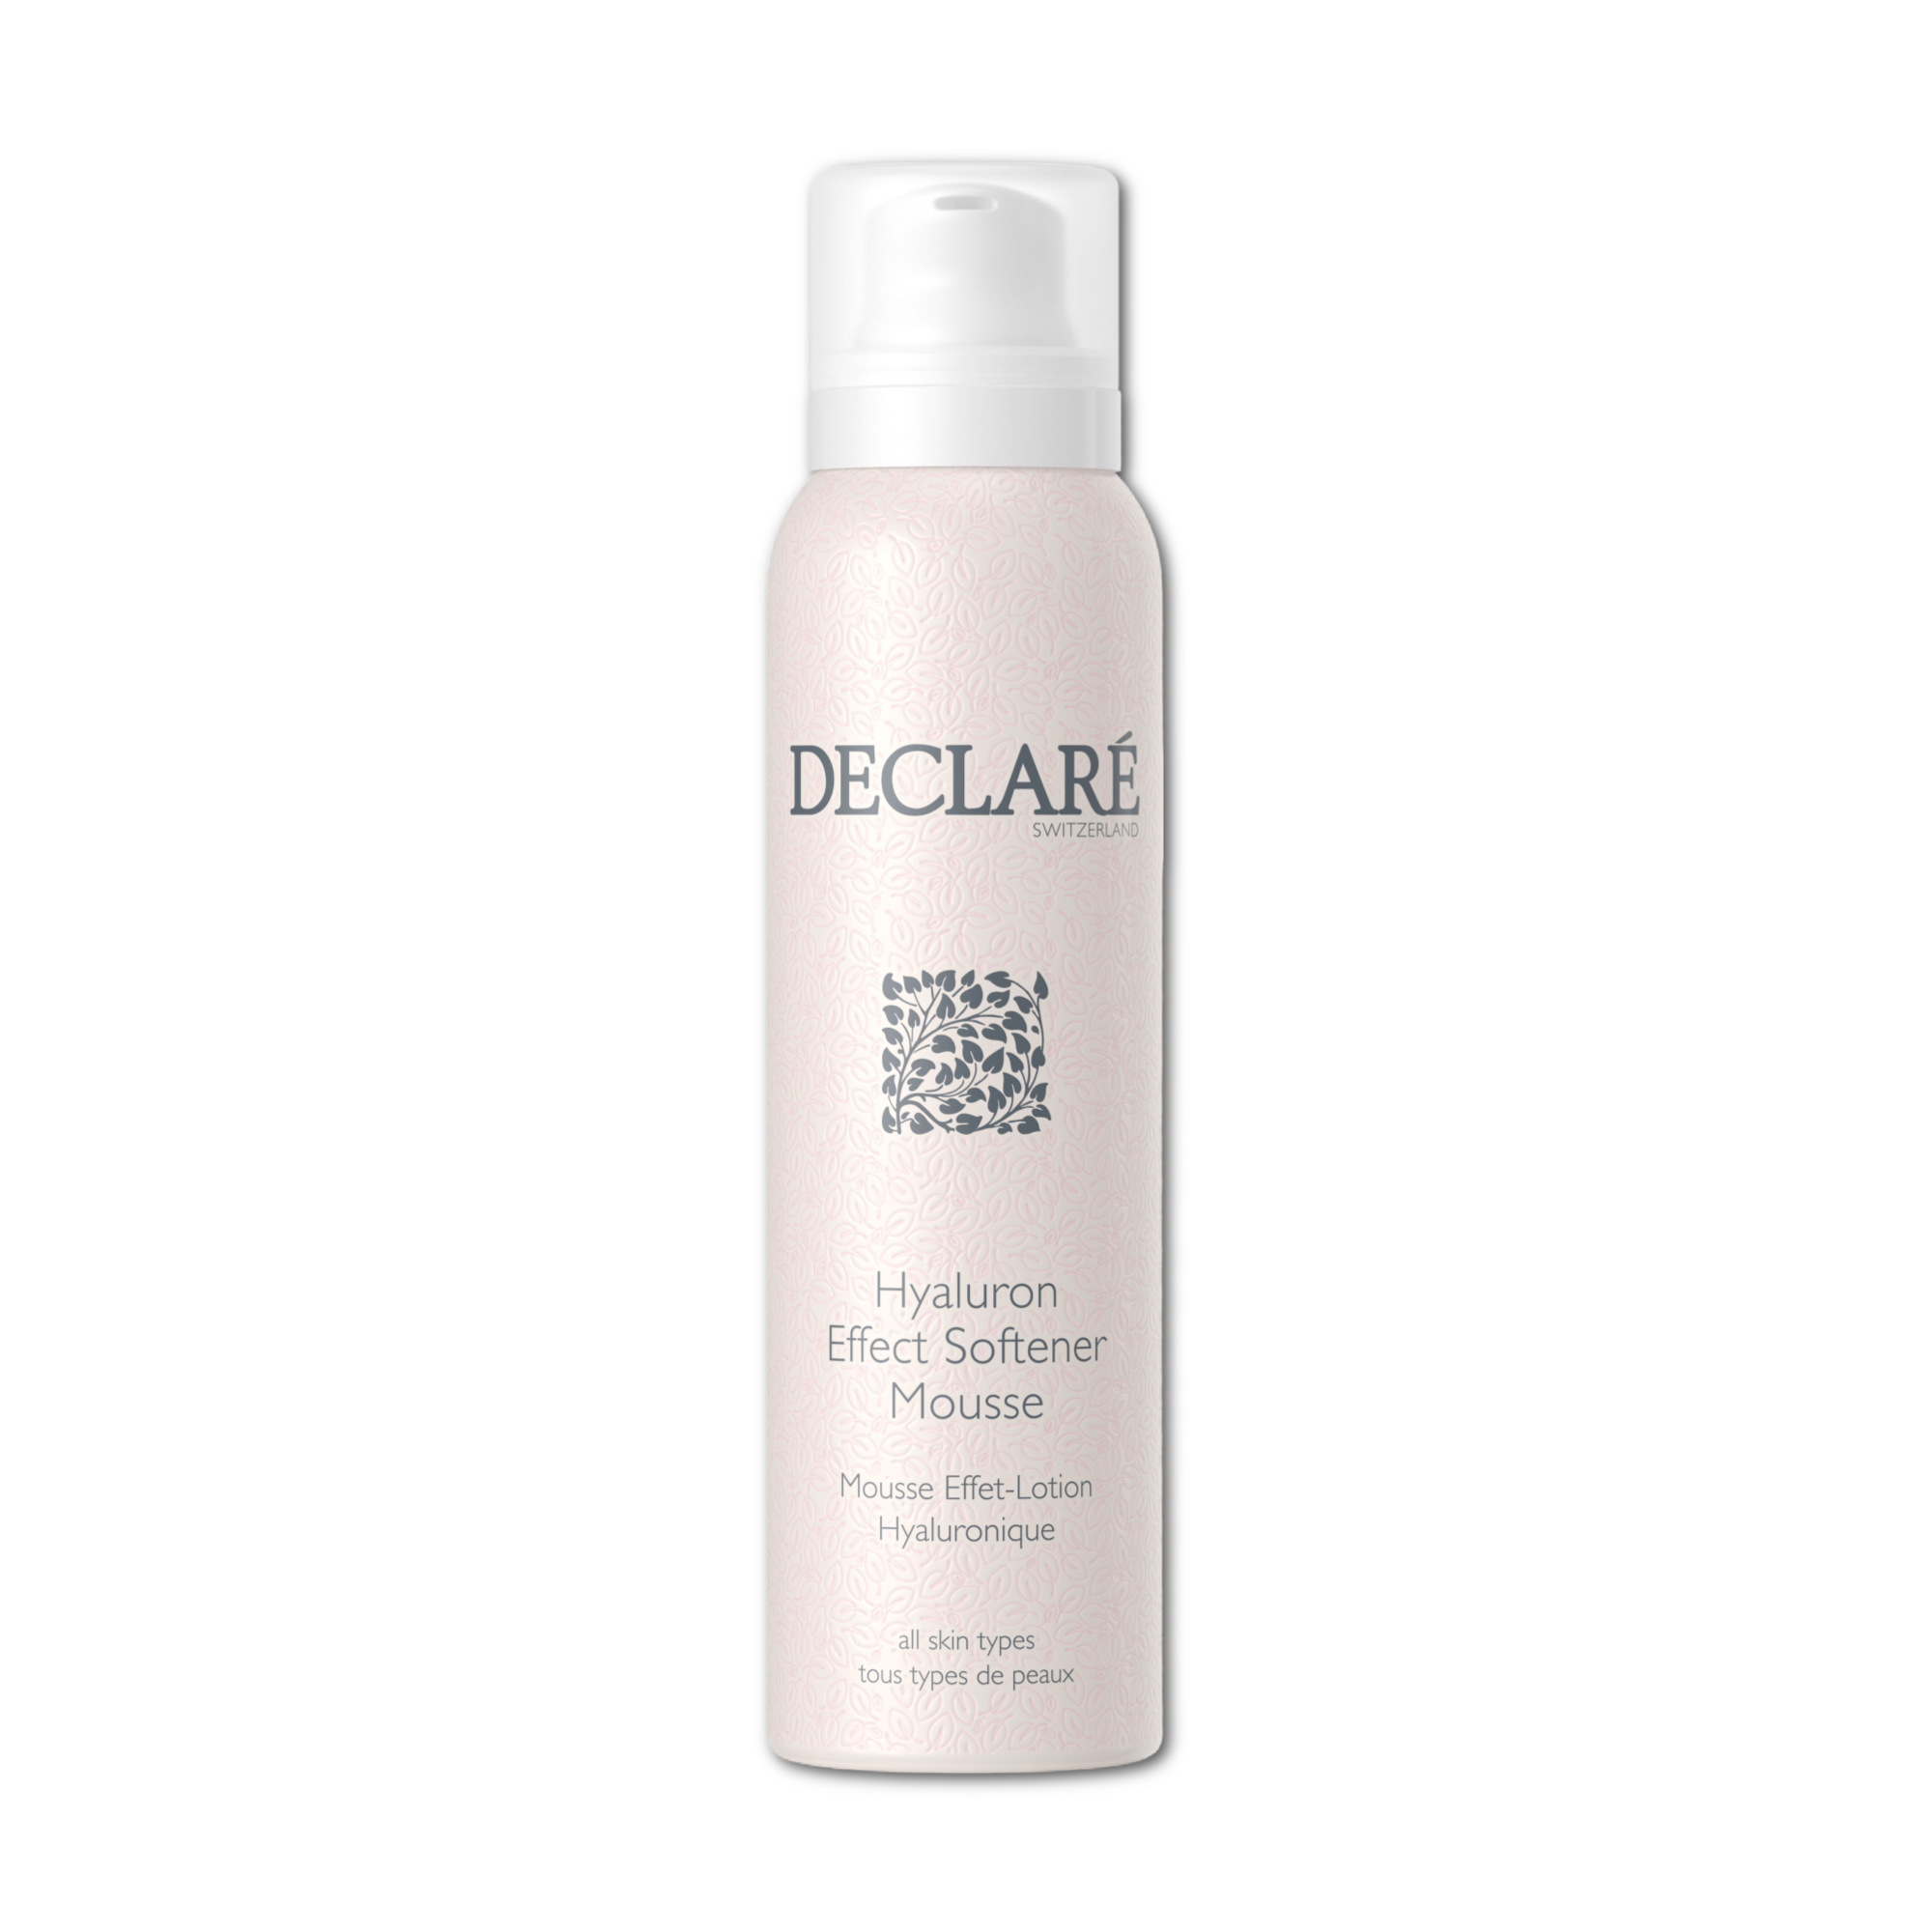 NEW DECLARE HYALURON EFFECT SOFTENER MOUSSE